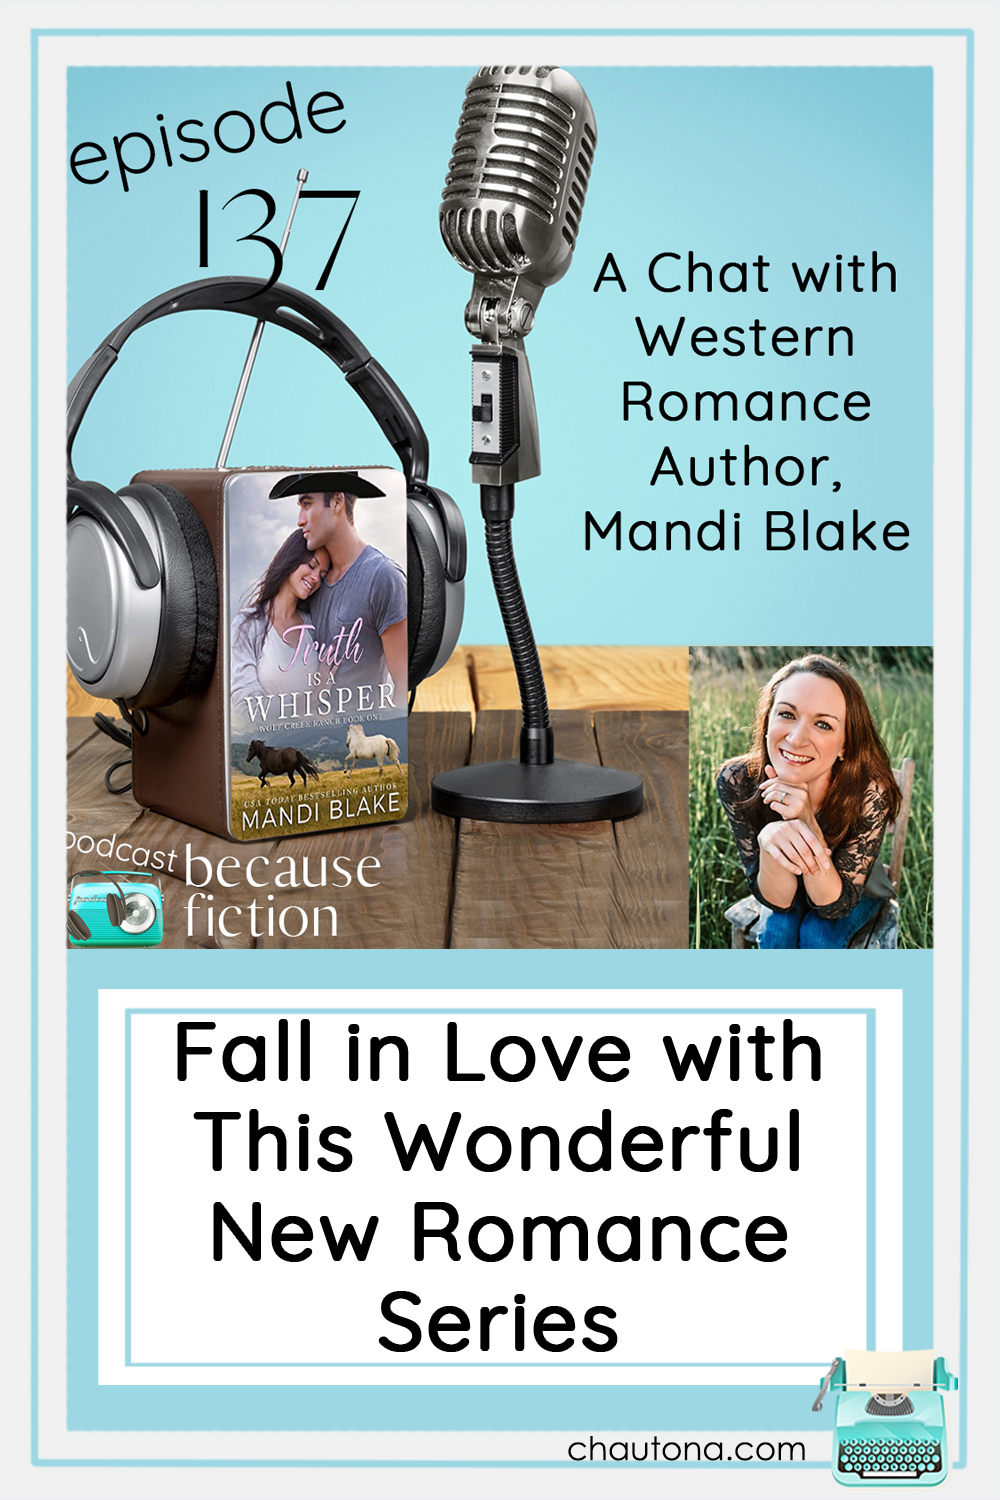 Get ready for a wonderful new romance series by Contemporary Western Romance author, Mandi Blake and learn about lots of new books, too! via @chautonahavig